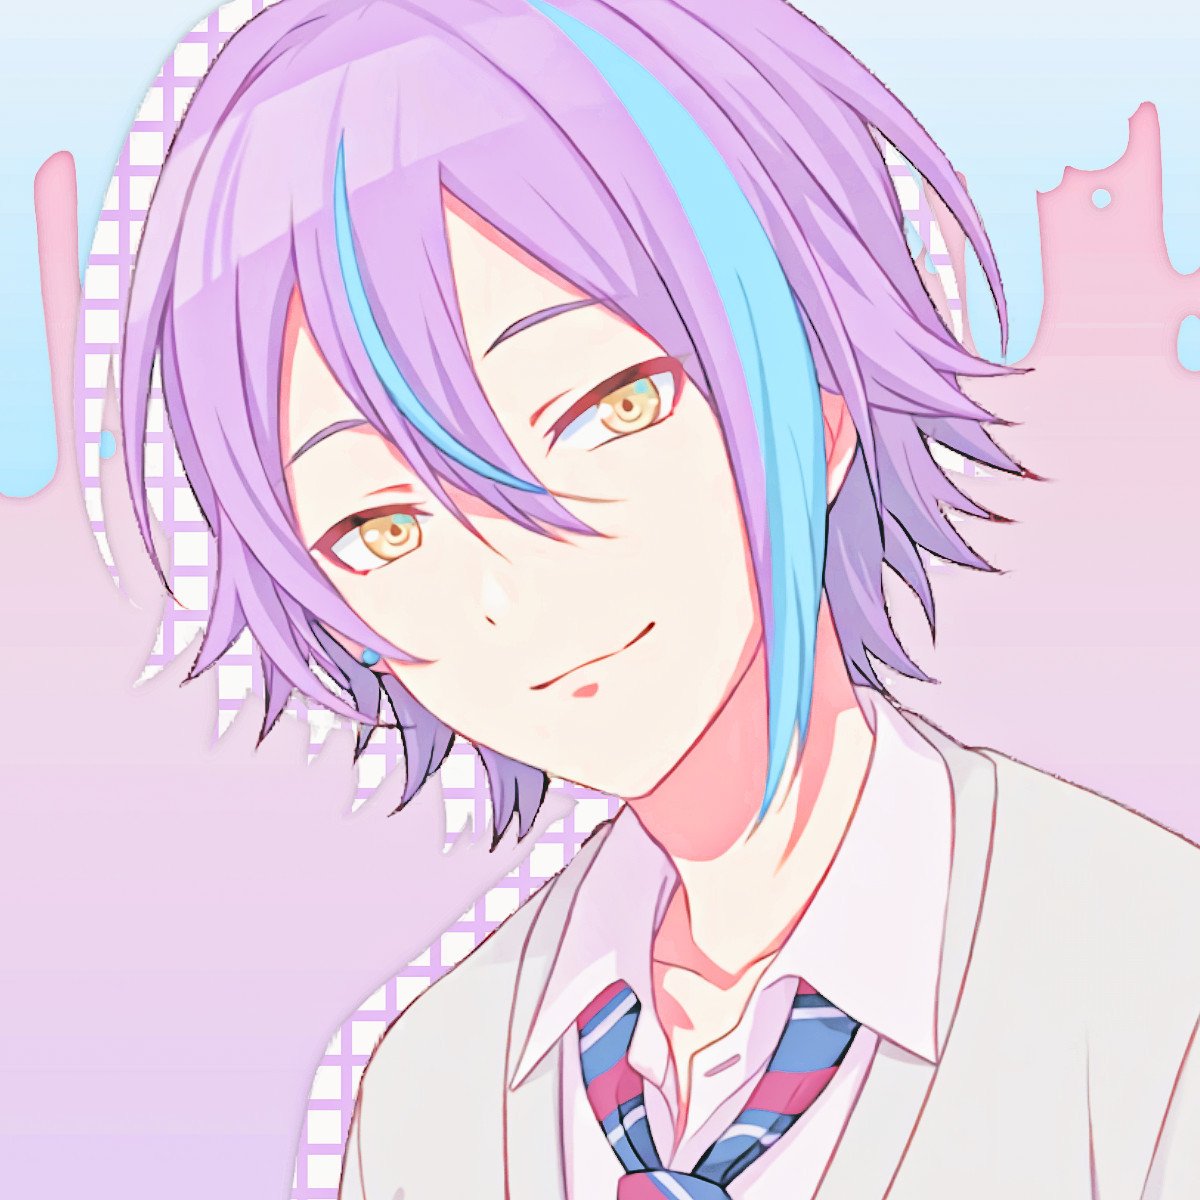 rui kamishiro icons. requested by anon free to